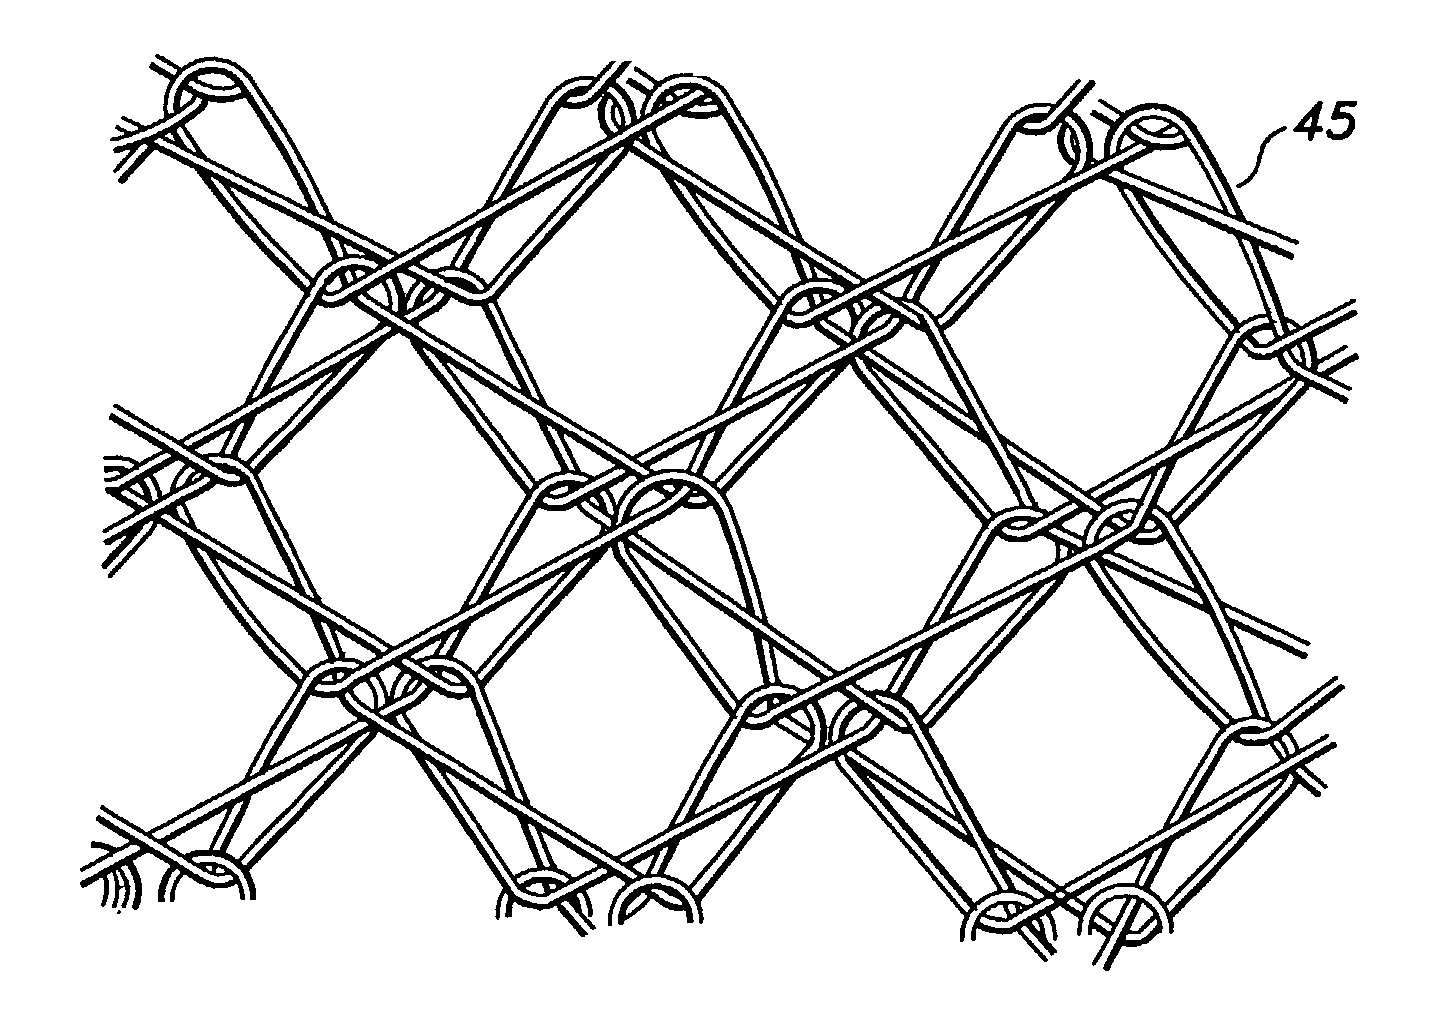 Flat knitted stent and method of making the same